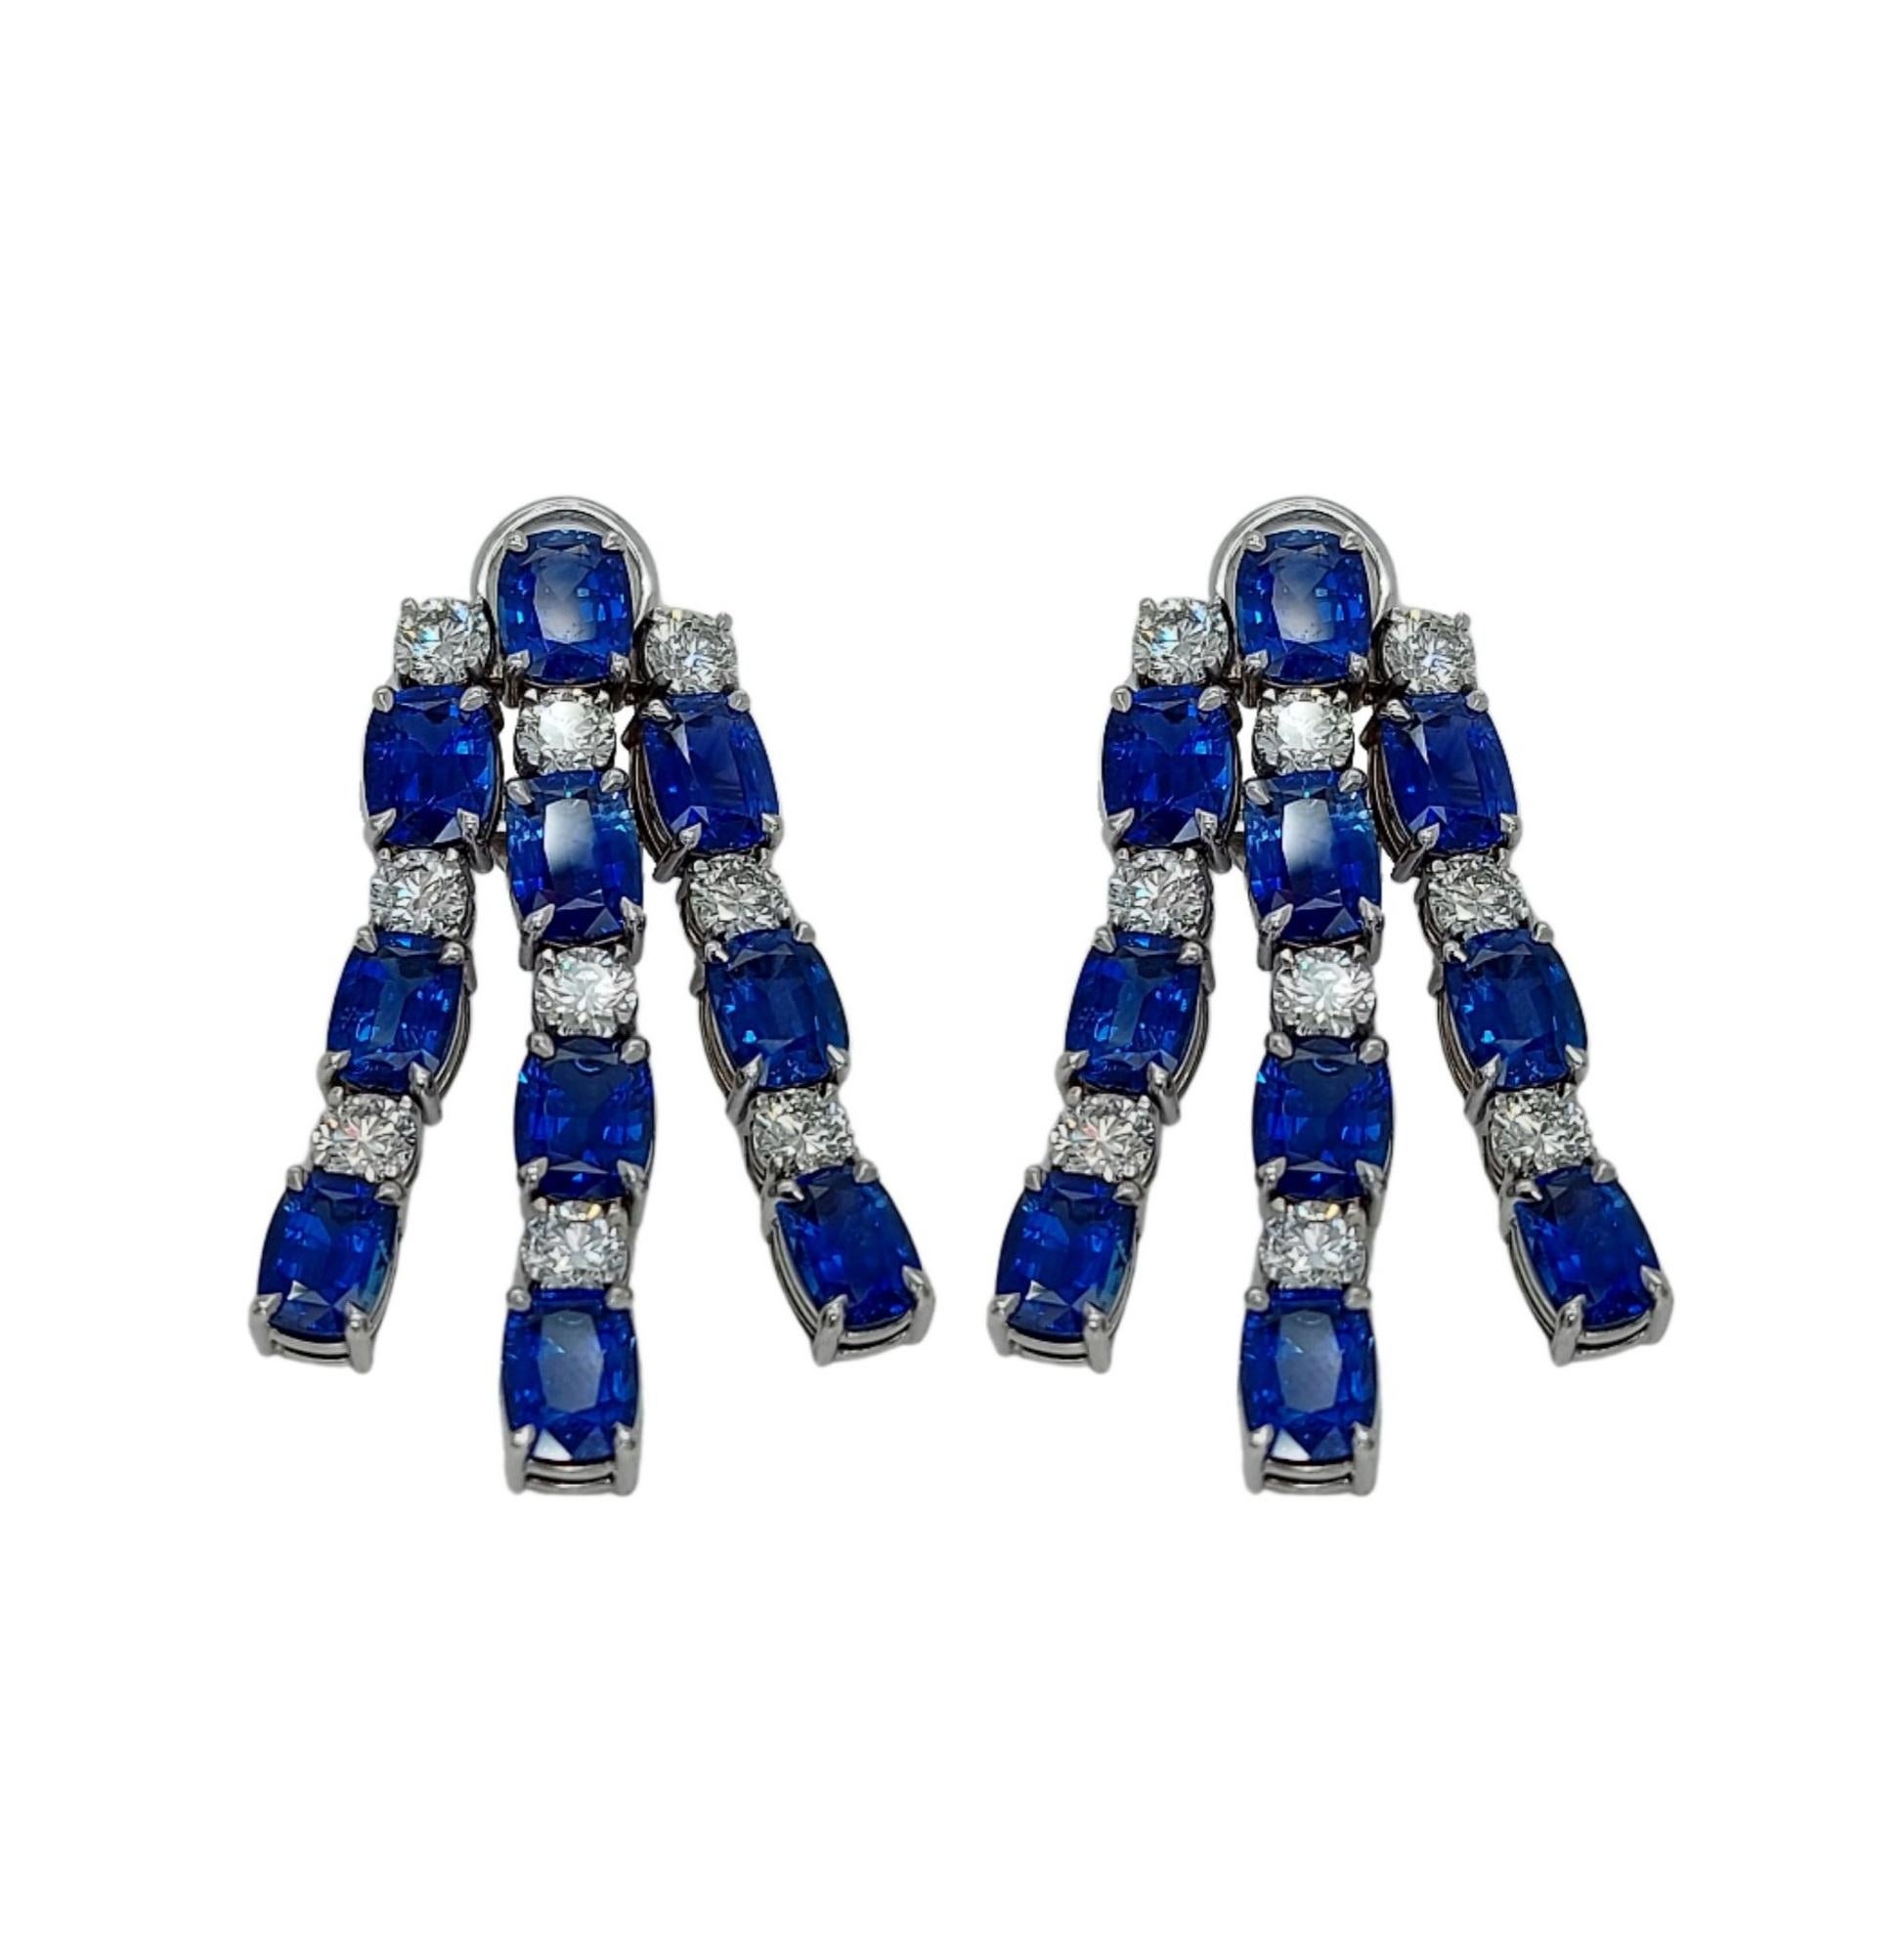 Contemporary 18kt White Gold Earrings with 21.42ct Sapphires, 5.09ct Diamonds, CGL Certified For Sale